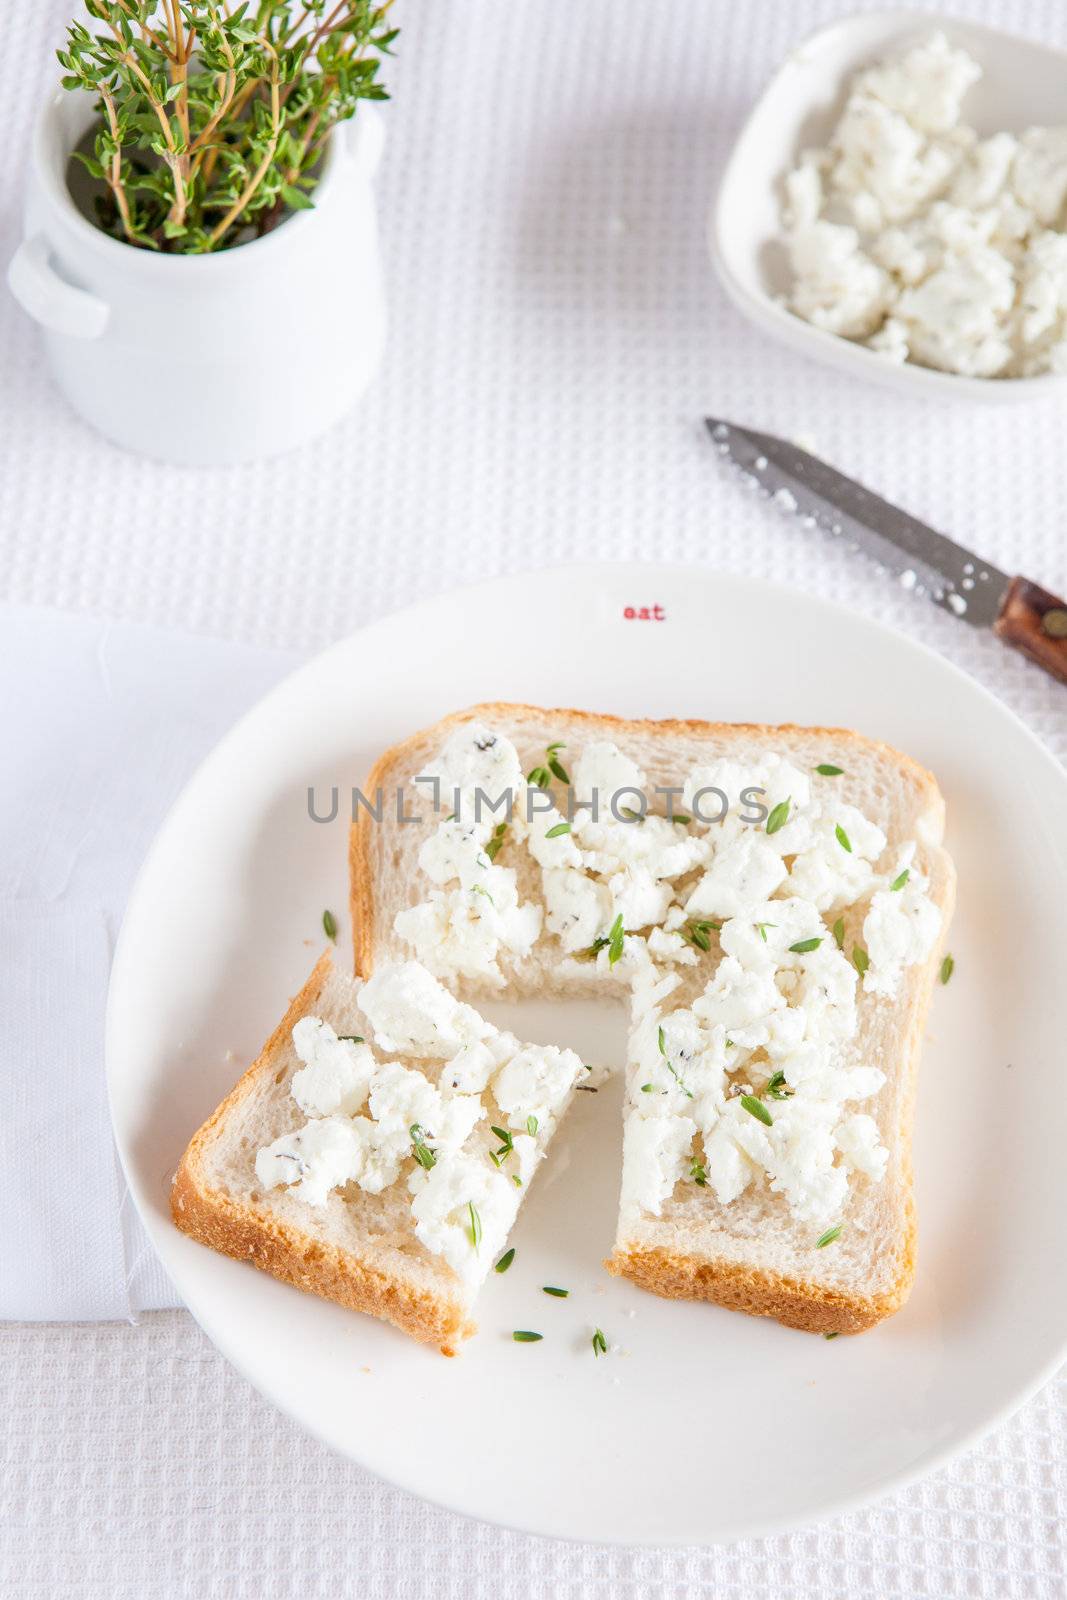 White bread sandwich with goatcheese and thyme sprinkled over it